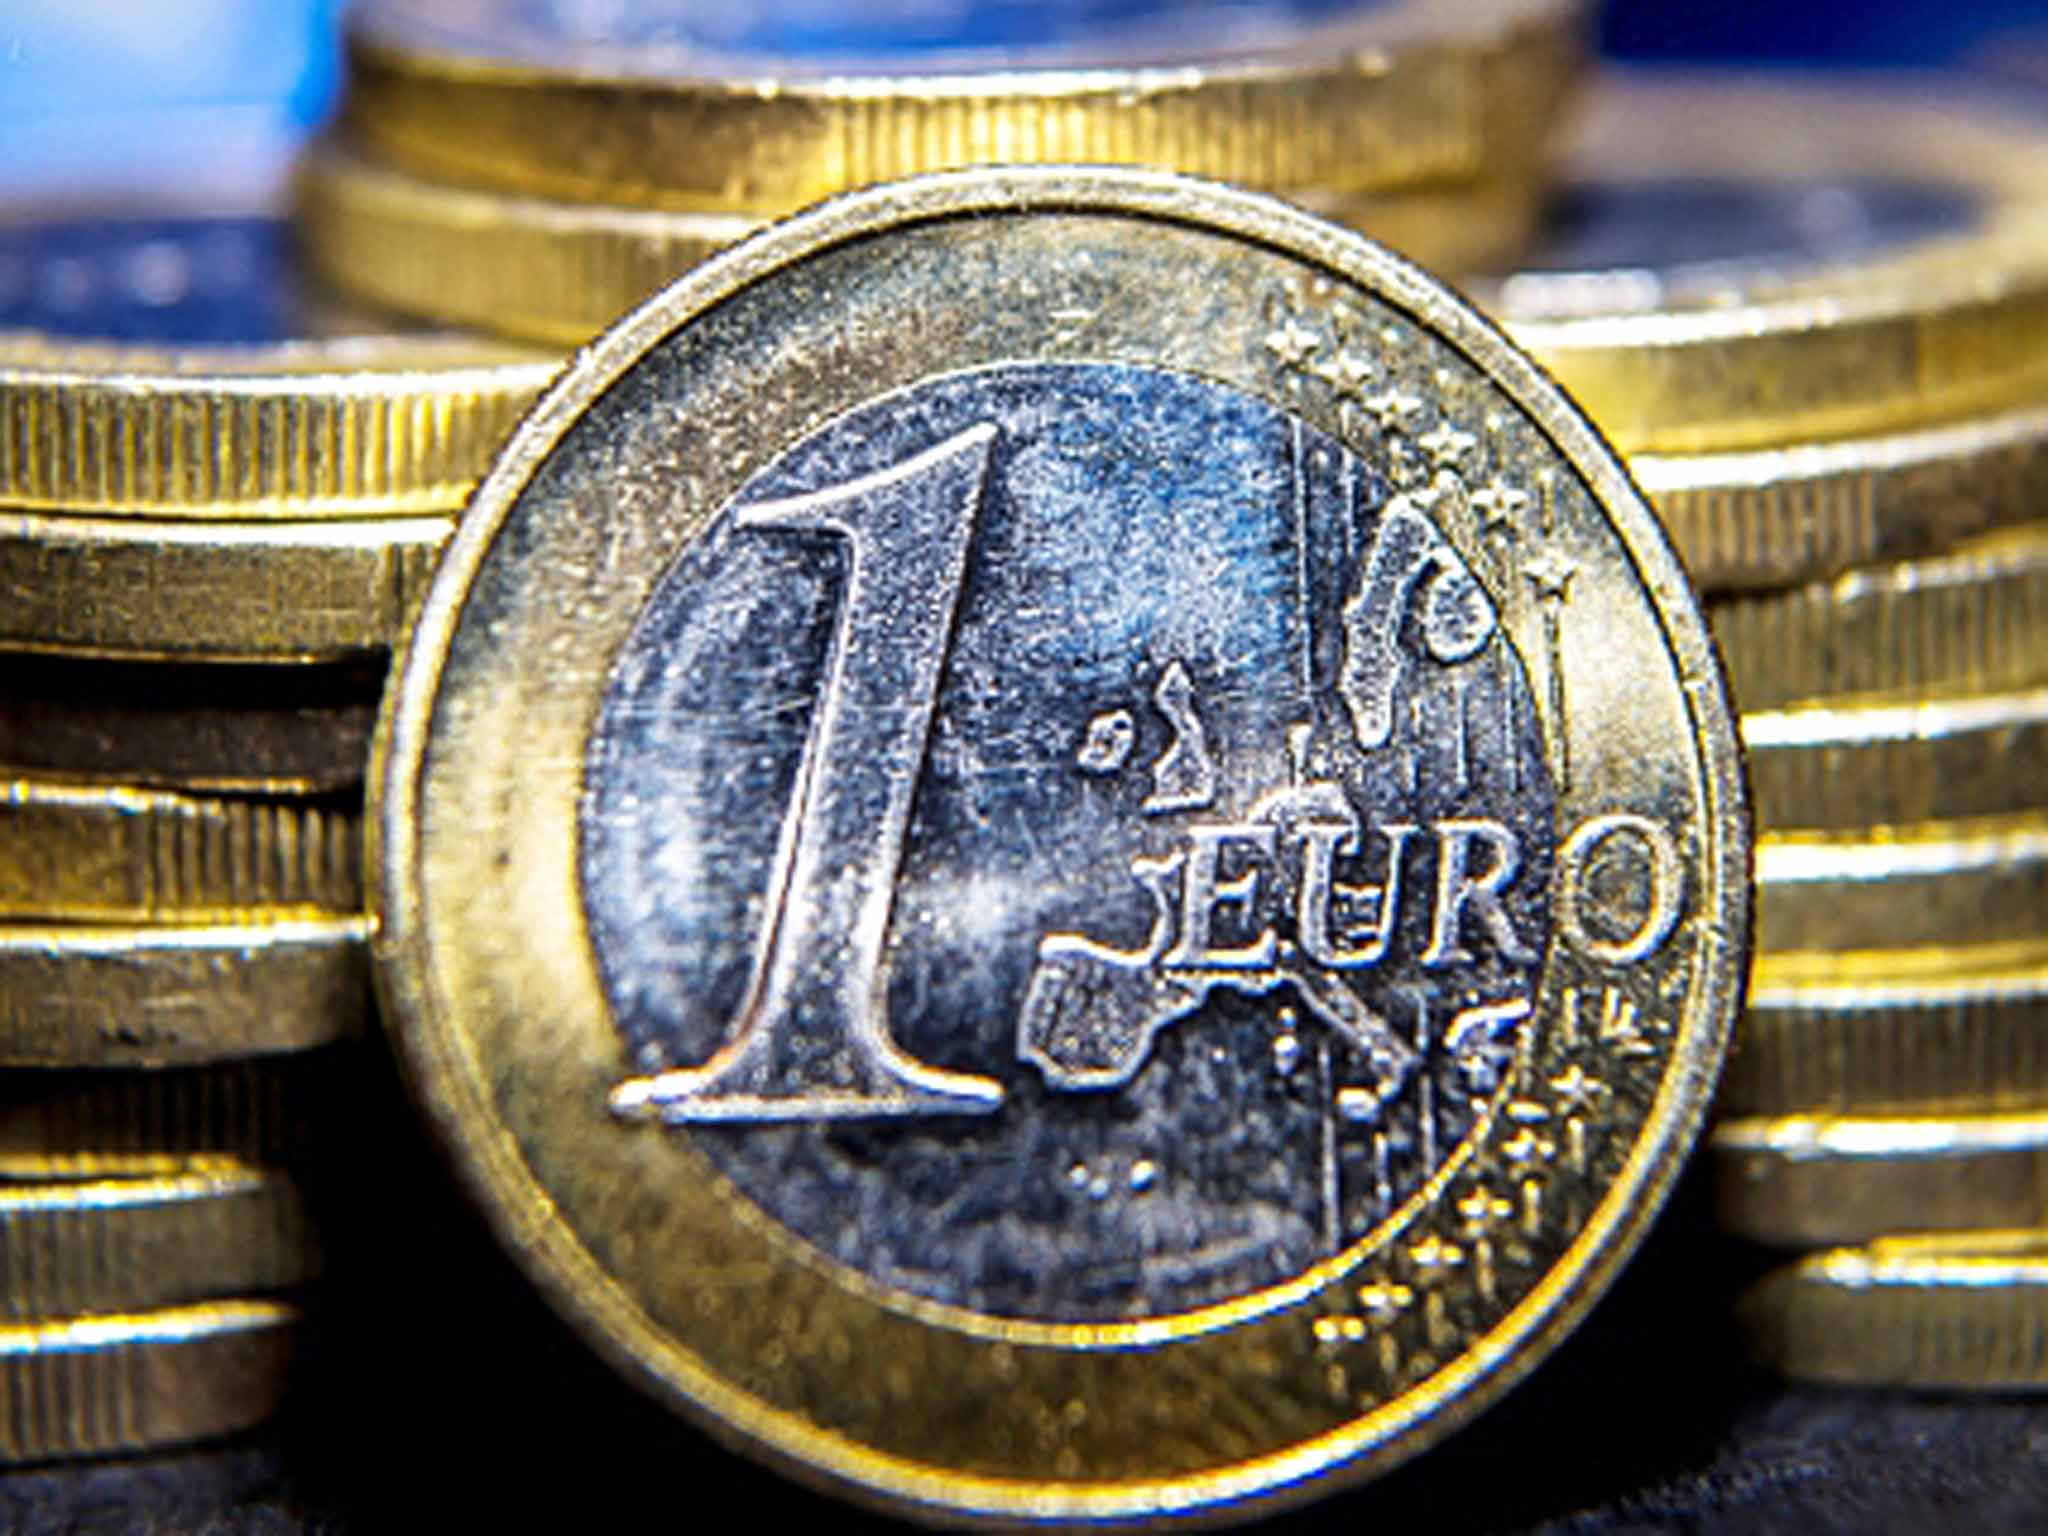 Cash in: hedge your bets when buying euros